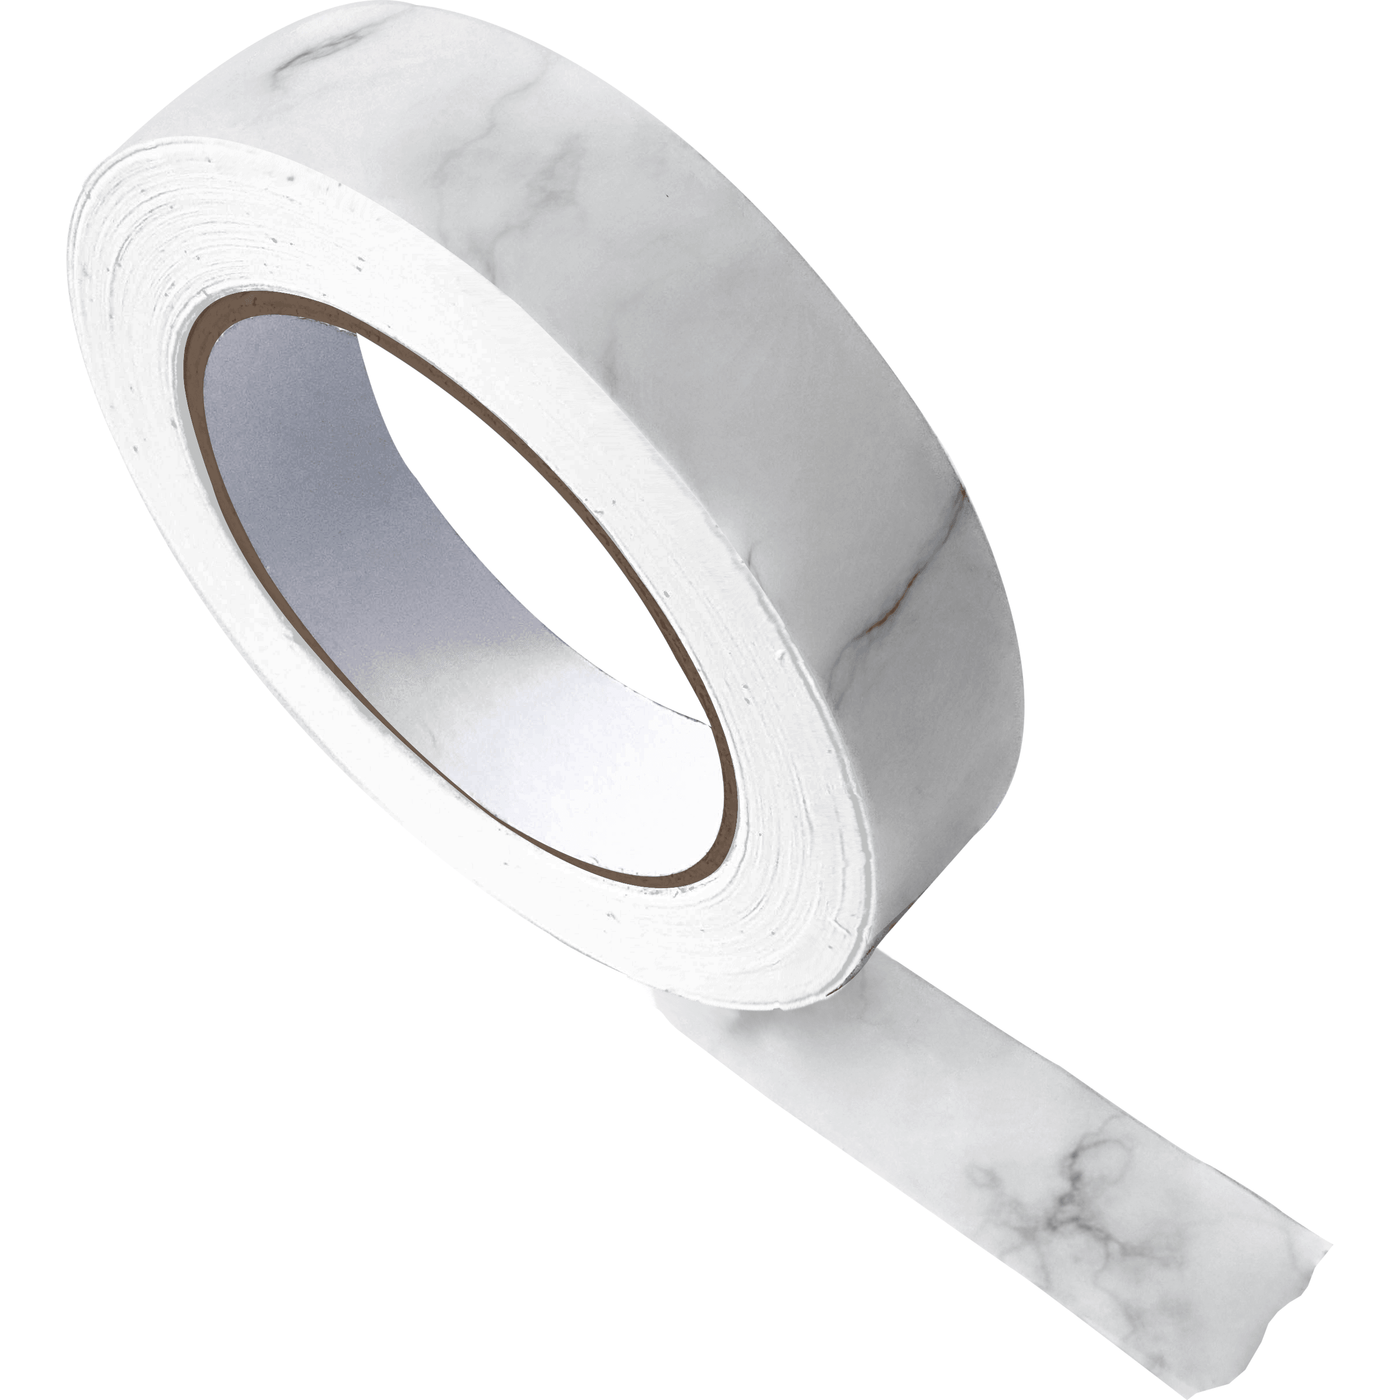 Marble Elegance Washi Tape by Rongrong DeVoe